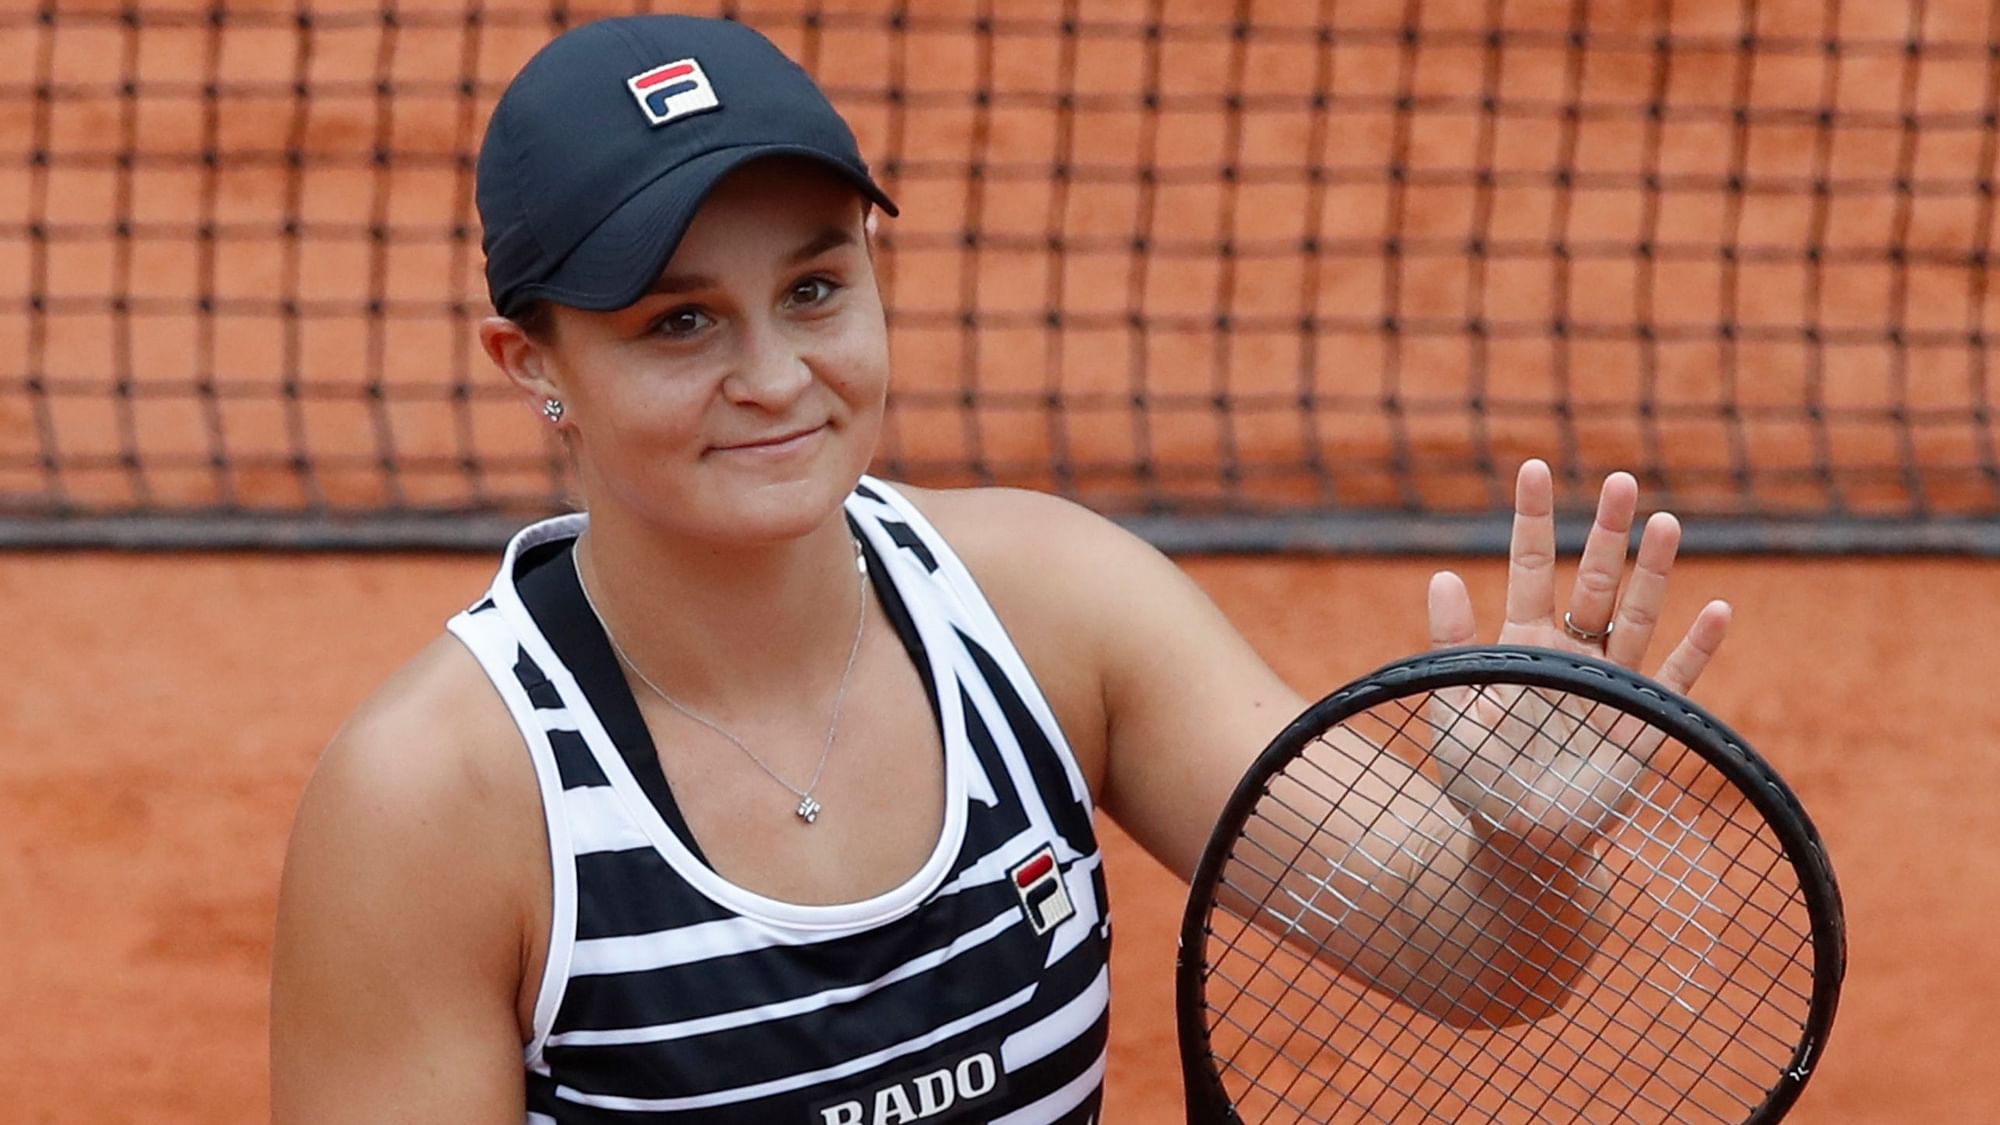 Australia’s Ash Barty remains at the top of the Women’s Tennis Association (WTA) rankings released on Tuesday.